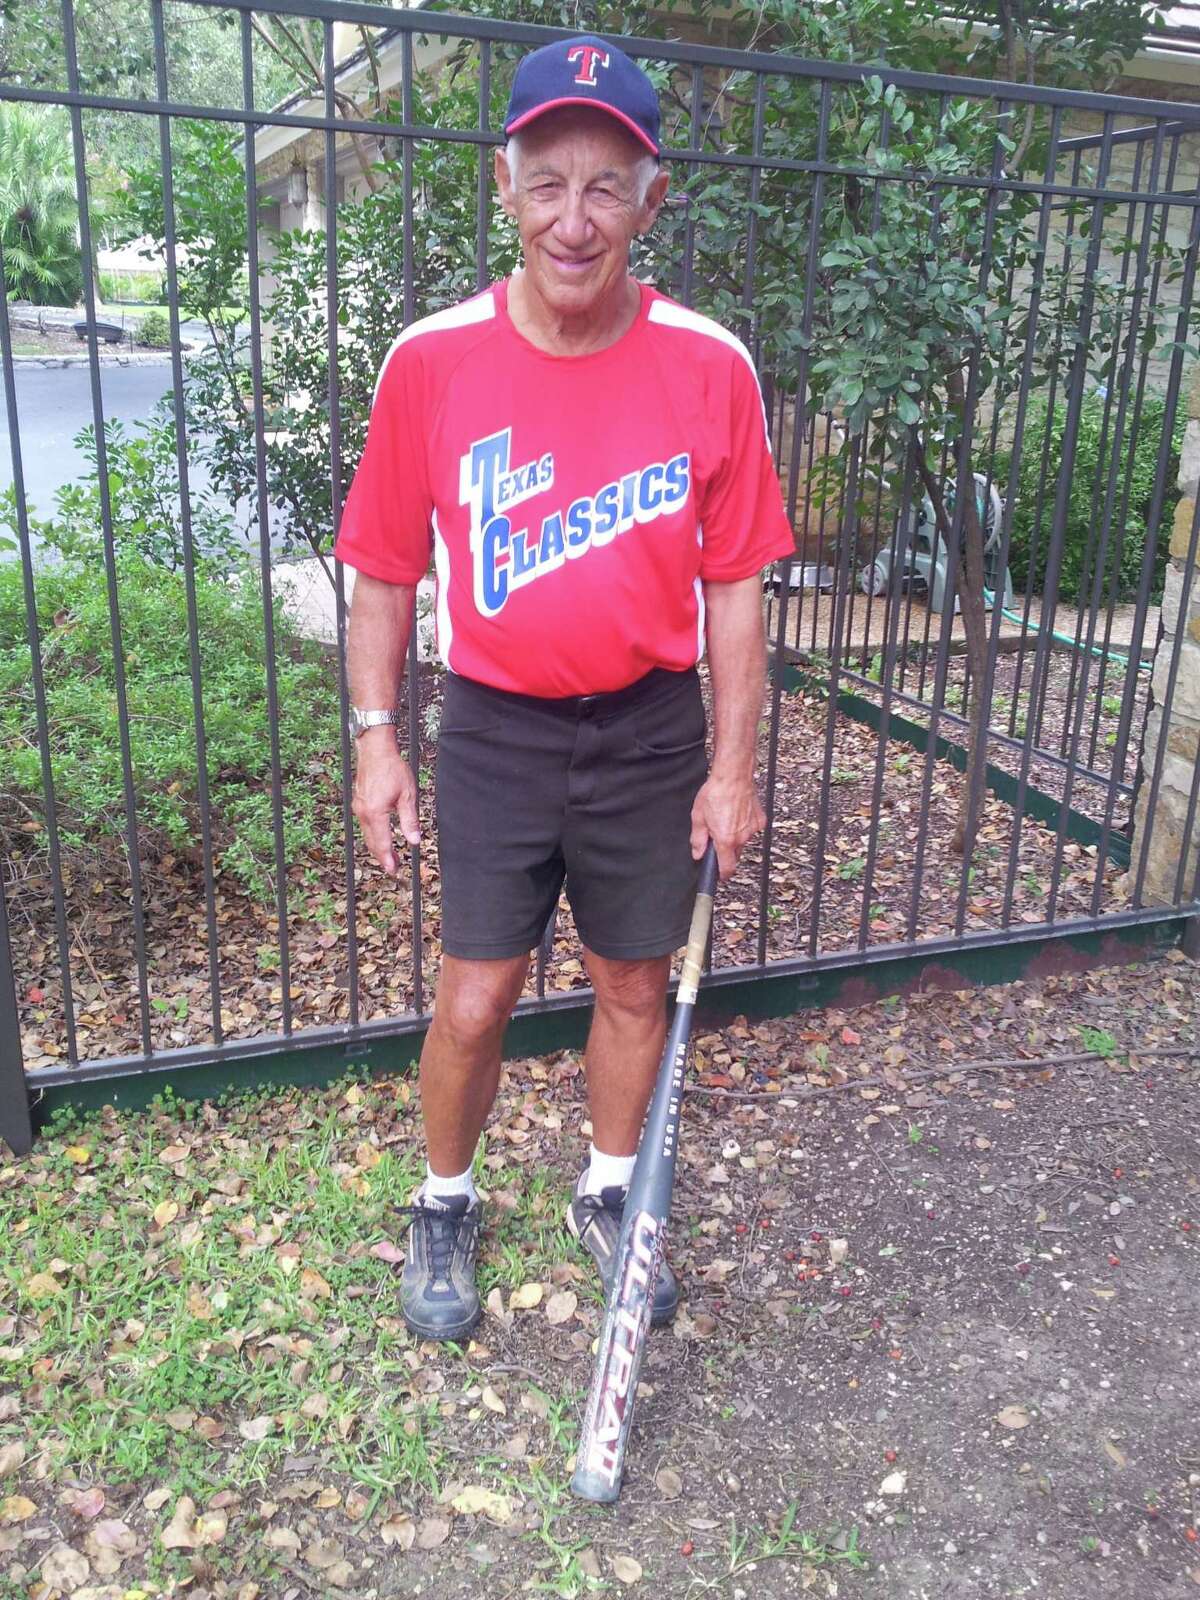 Bill Altman was a member of the Texas Classics, who won the 80-plus AAA SSUSA/LVSSA World Masters title on Sept. 30-Oct. 4 in Las Vegas. A total of 470 teams from the United States, Canada, Guam, Germany and Japan participated in senior softballs largest tournament. Altman, the only San Antonian on the team, serves as player/manager/chairman of the San Antonio Seniors Softball League.